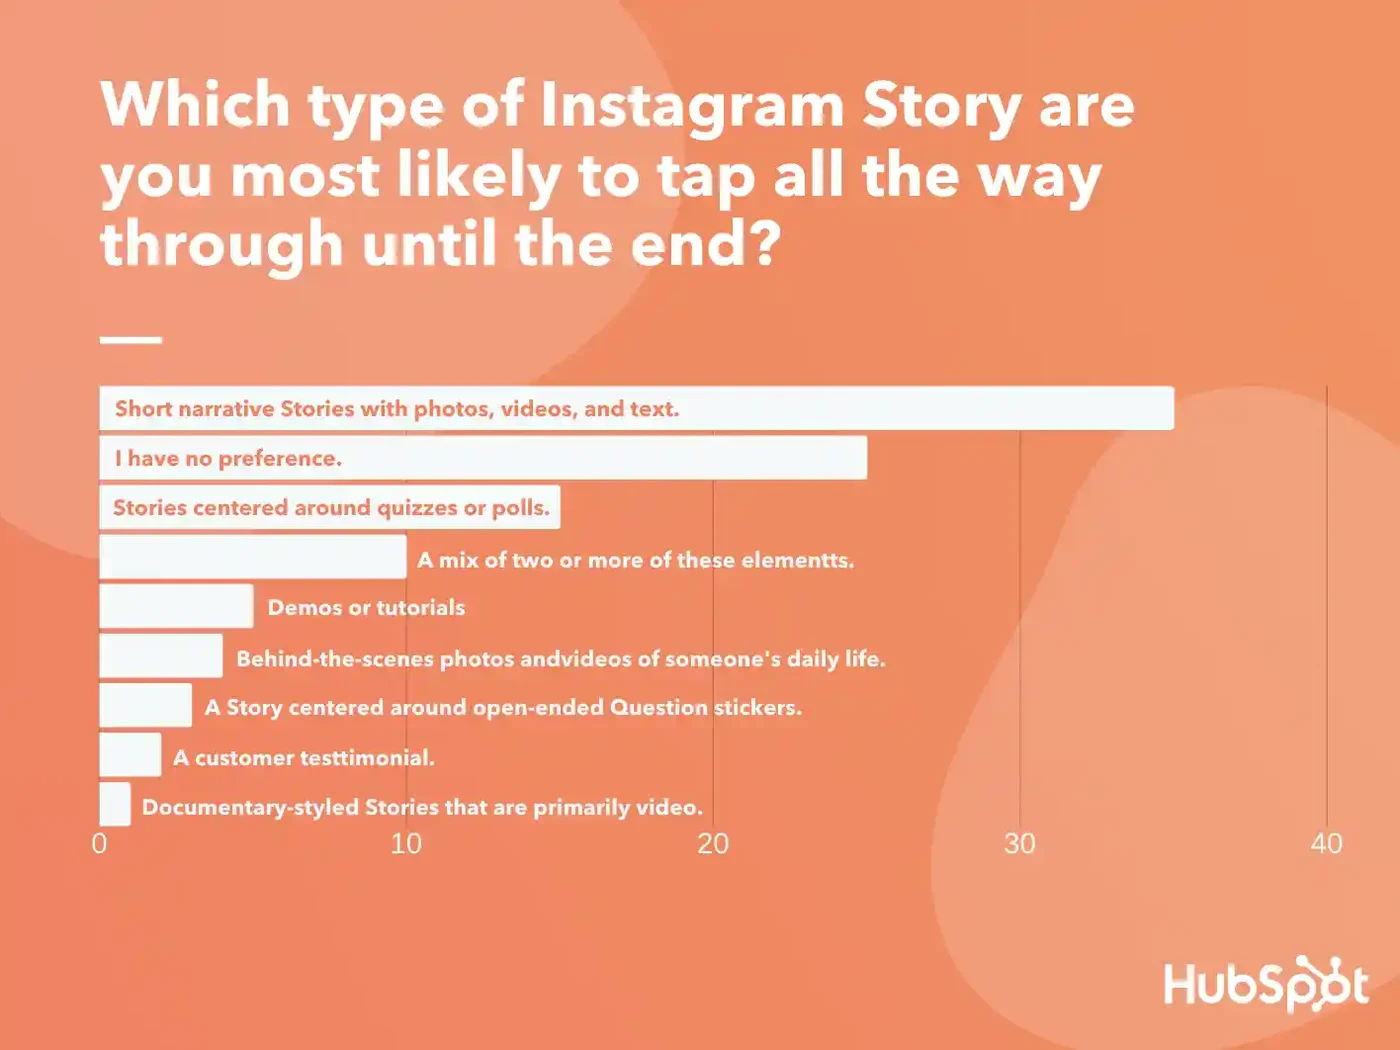 Bar chart comparing the different instagram story types that users are most likely to click through until the end.